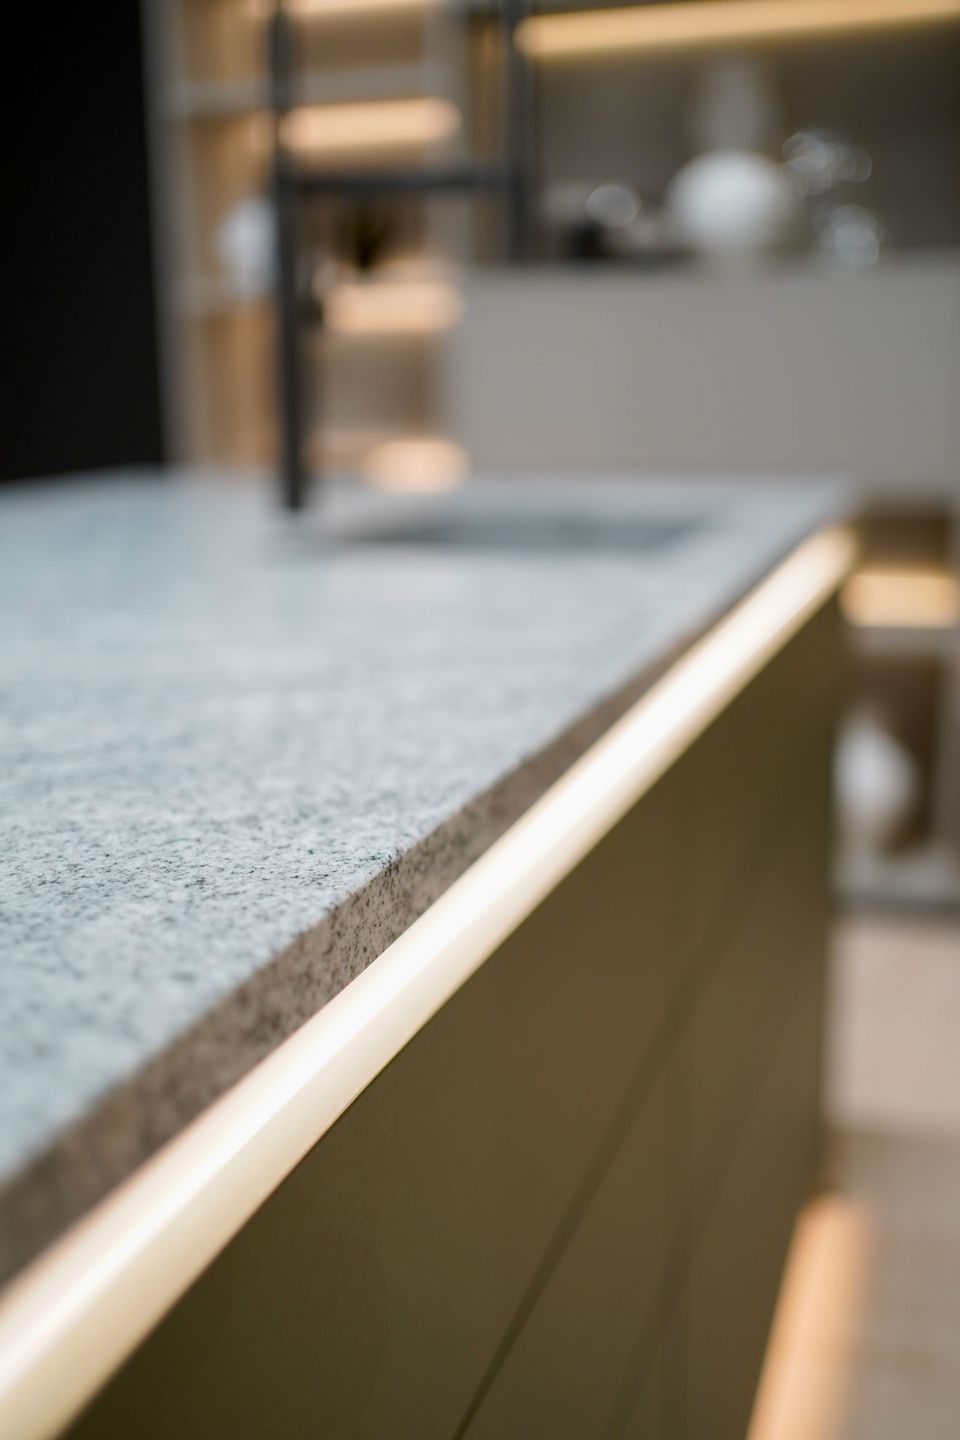 next125 Systemo natural stone worktop